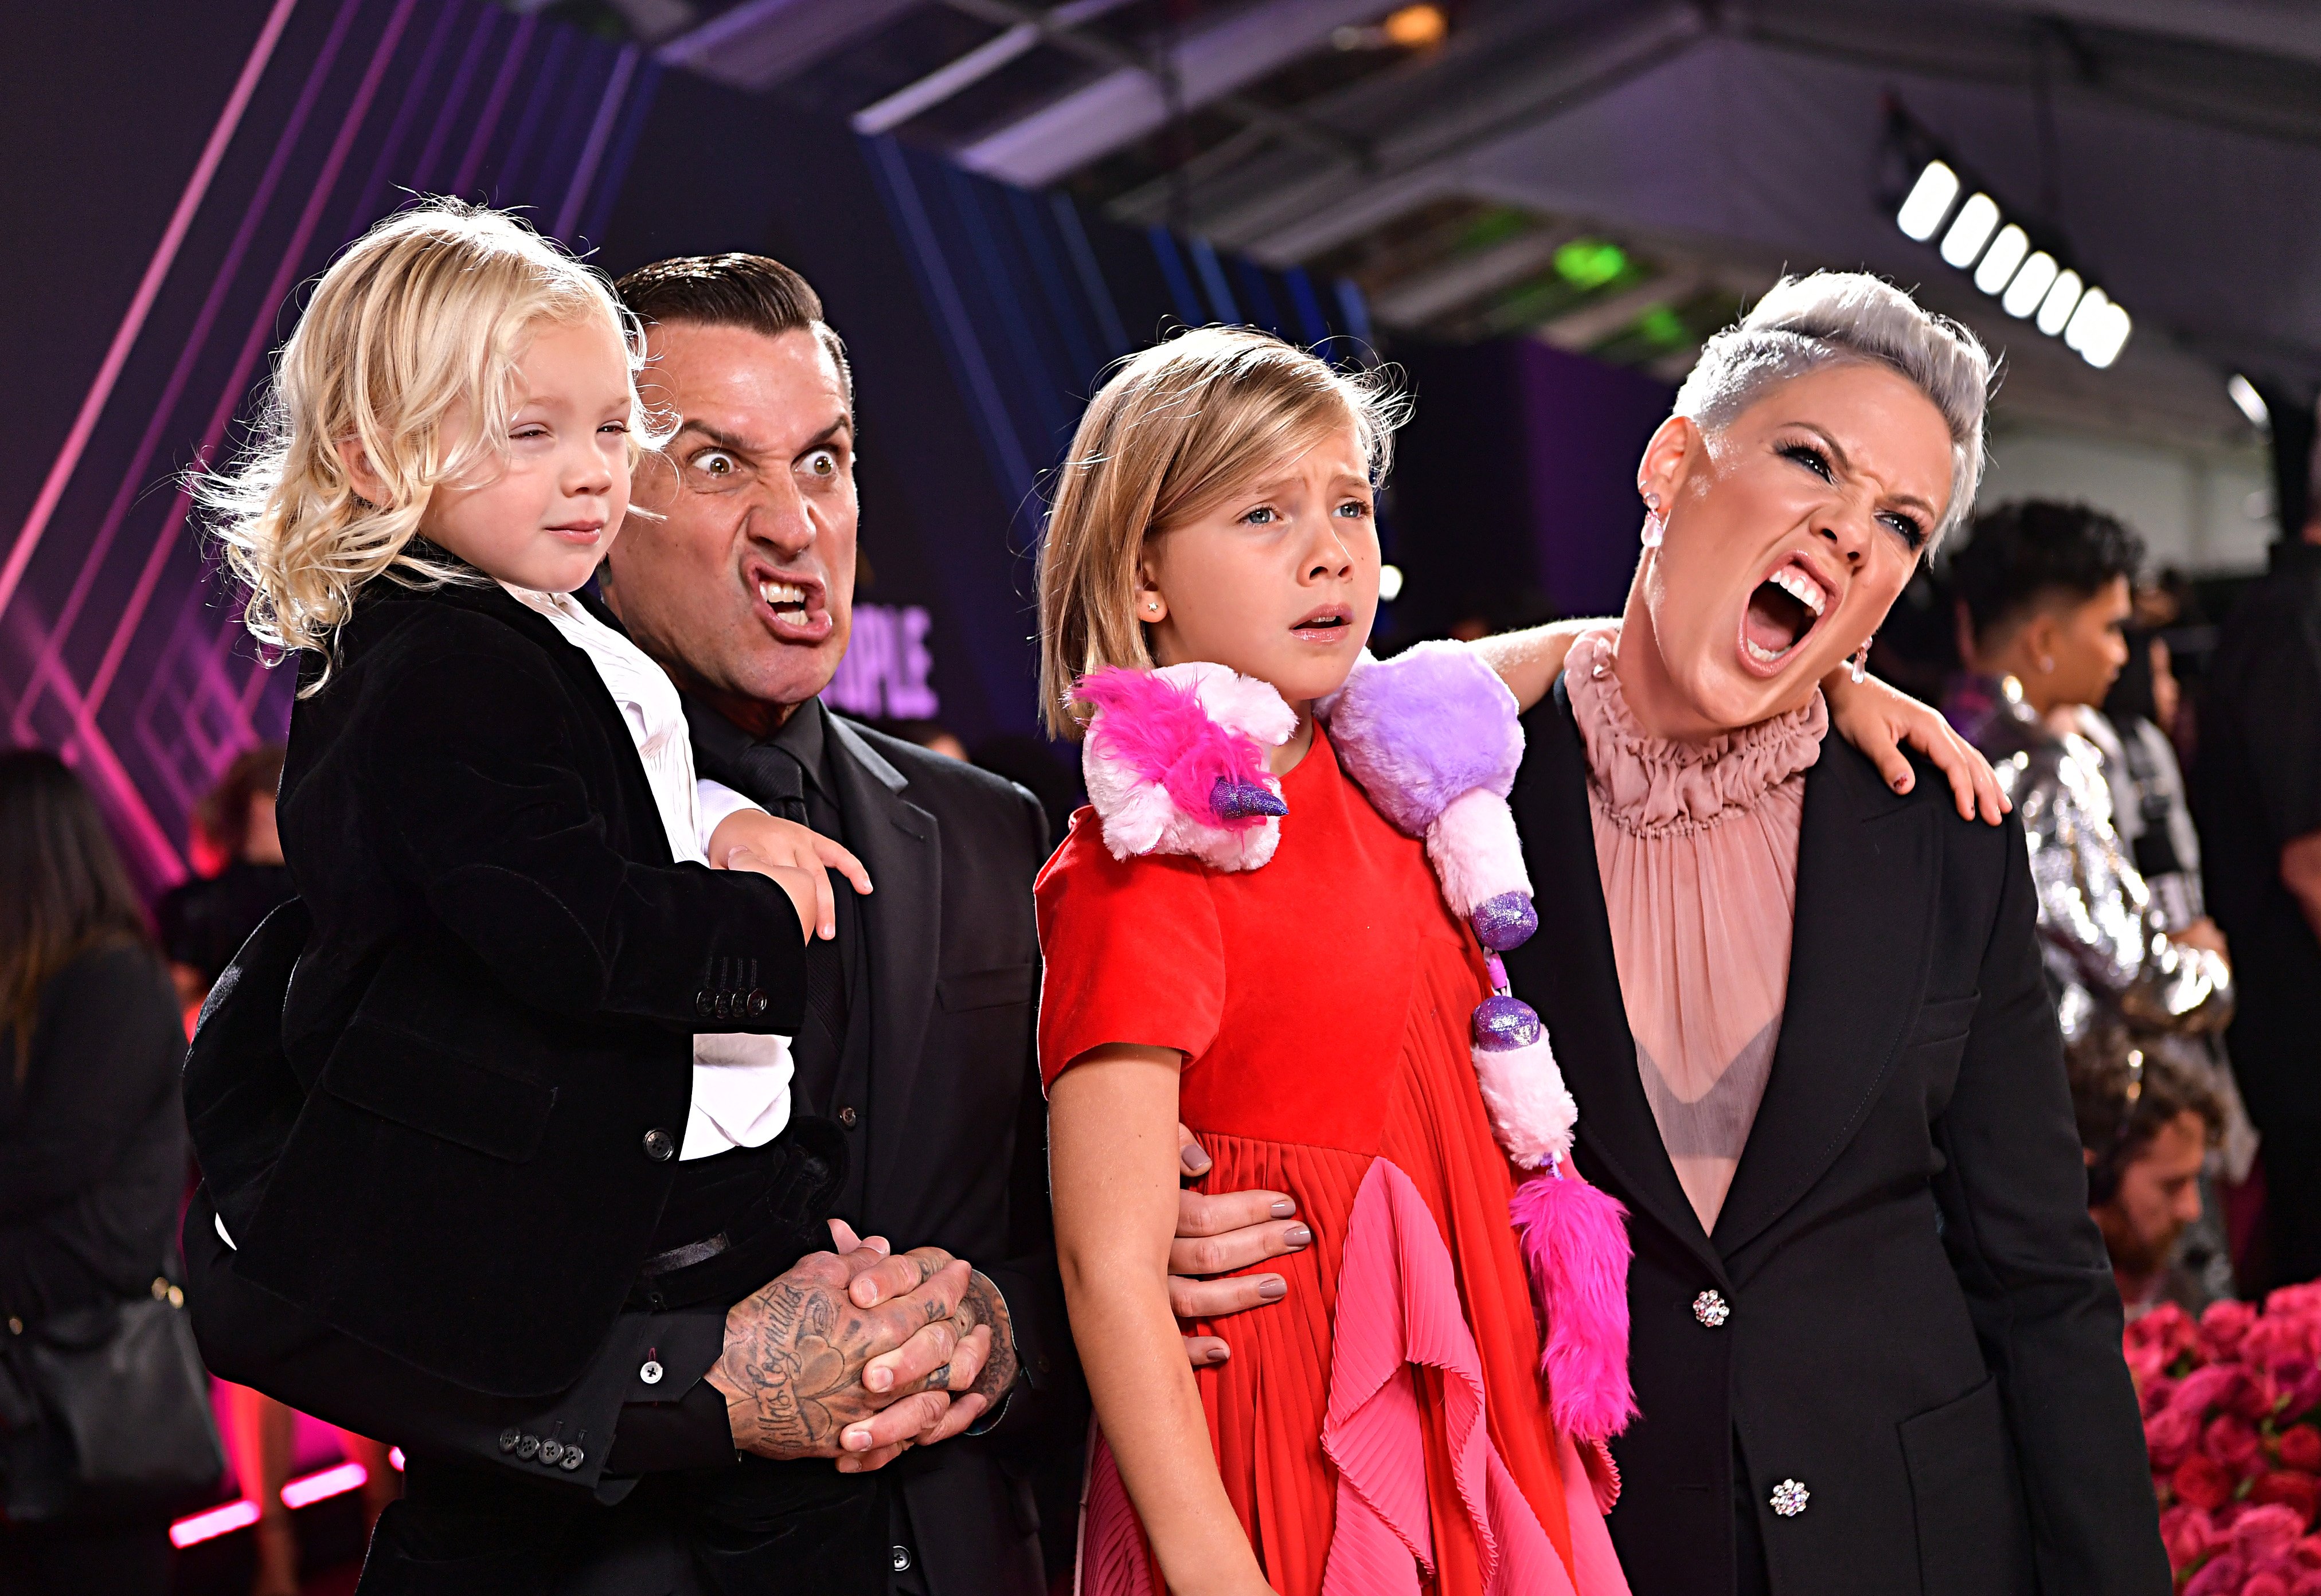 Carey Hart and Pink with theirs kids, Jameson and Willow, during the 2019 E! People's Choice Awards at the Barker Hangar on November 10, 2019. | Source: Getty Images